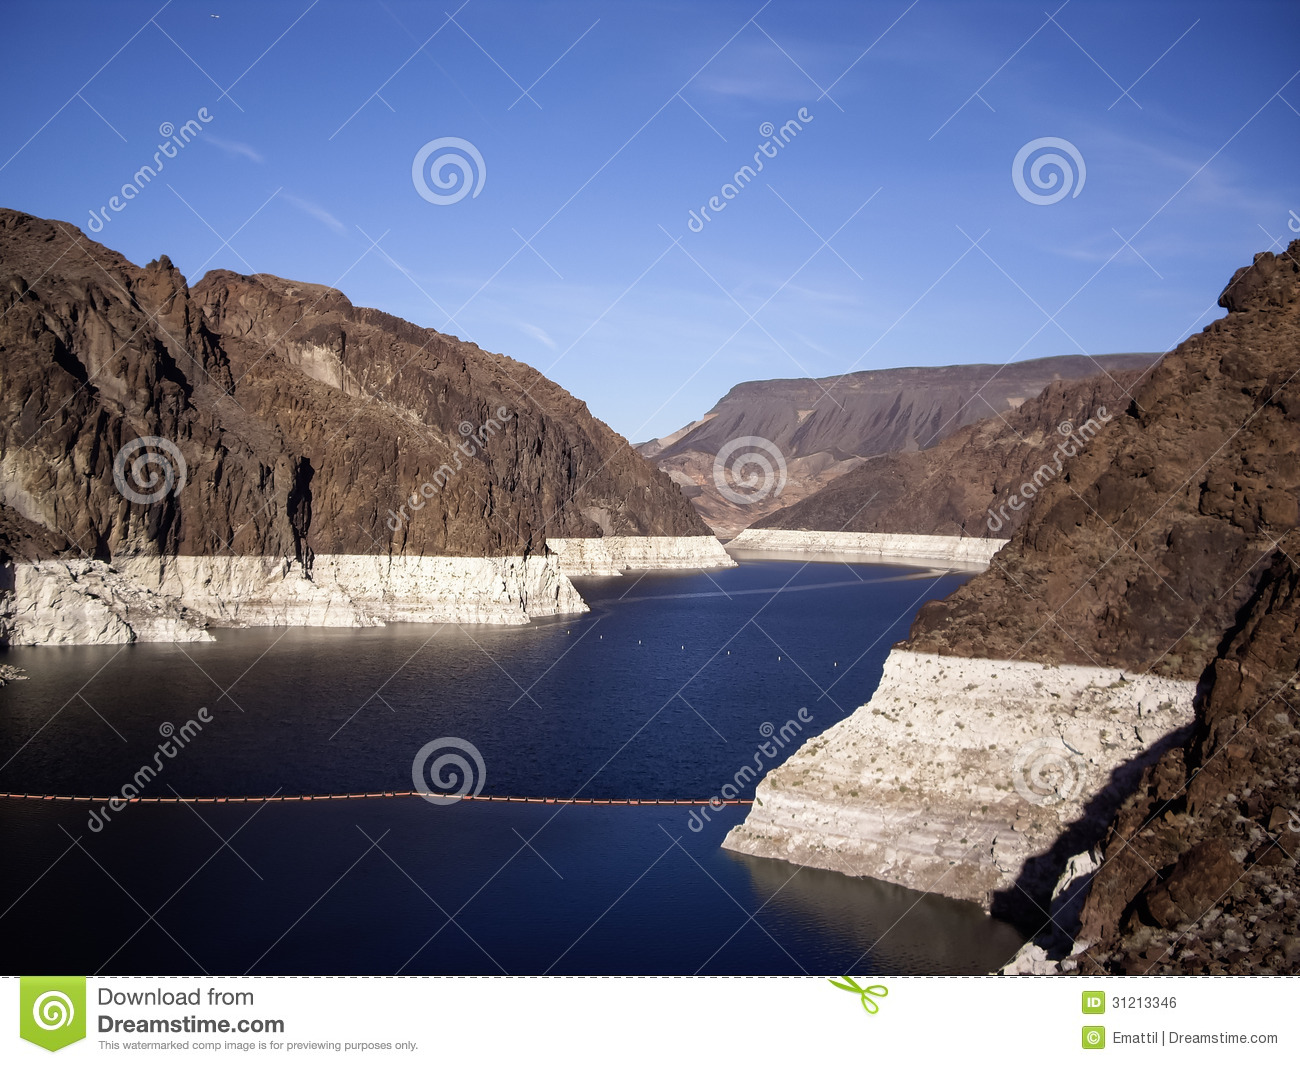 View Of Hoover Dam Nevada Royalty Free Stock Image   Image  31213346